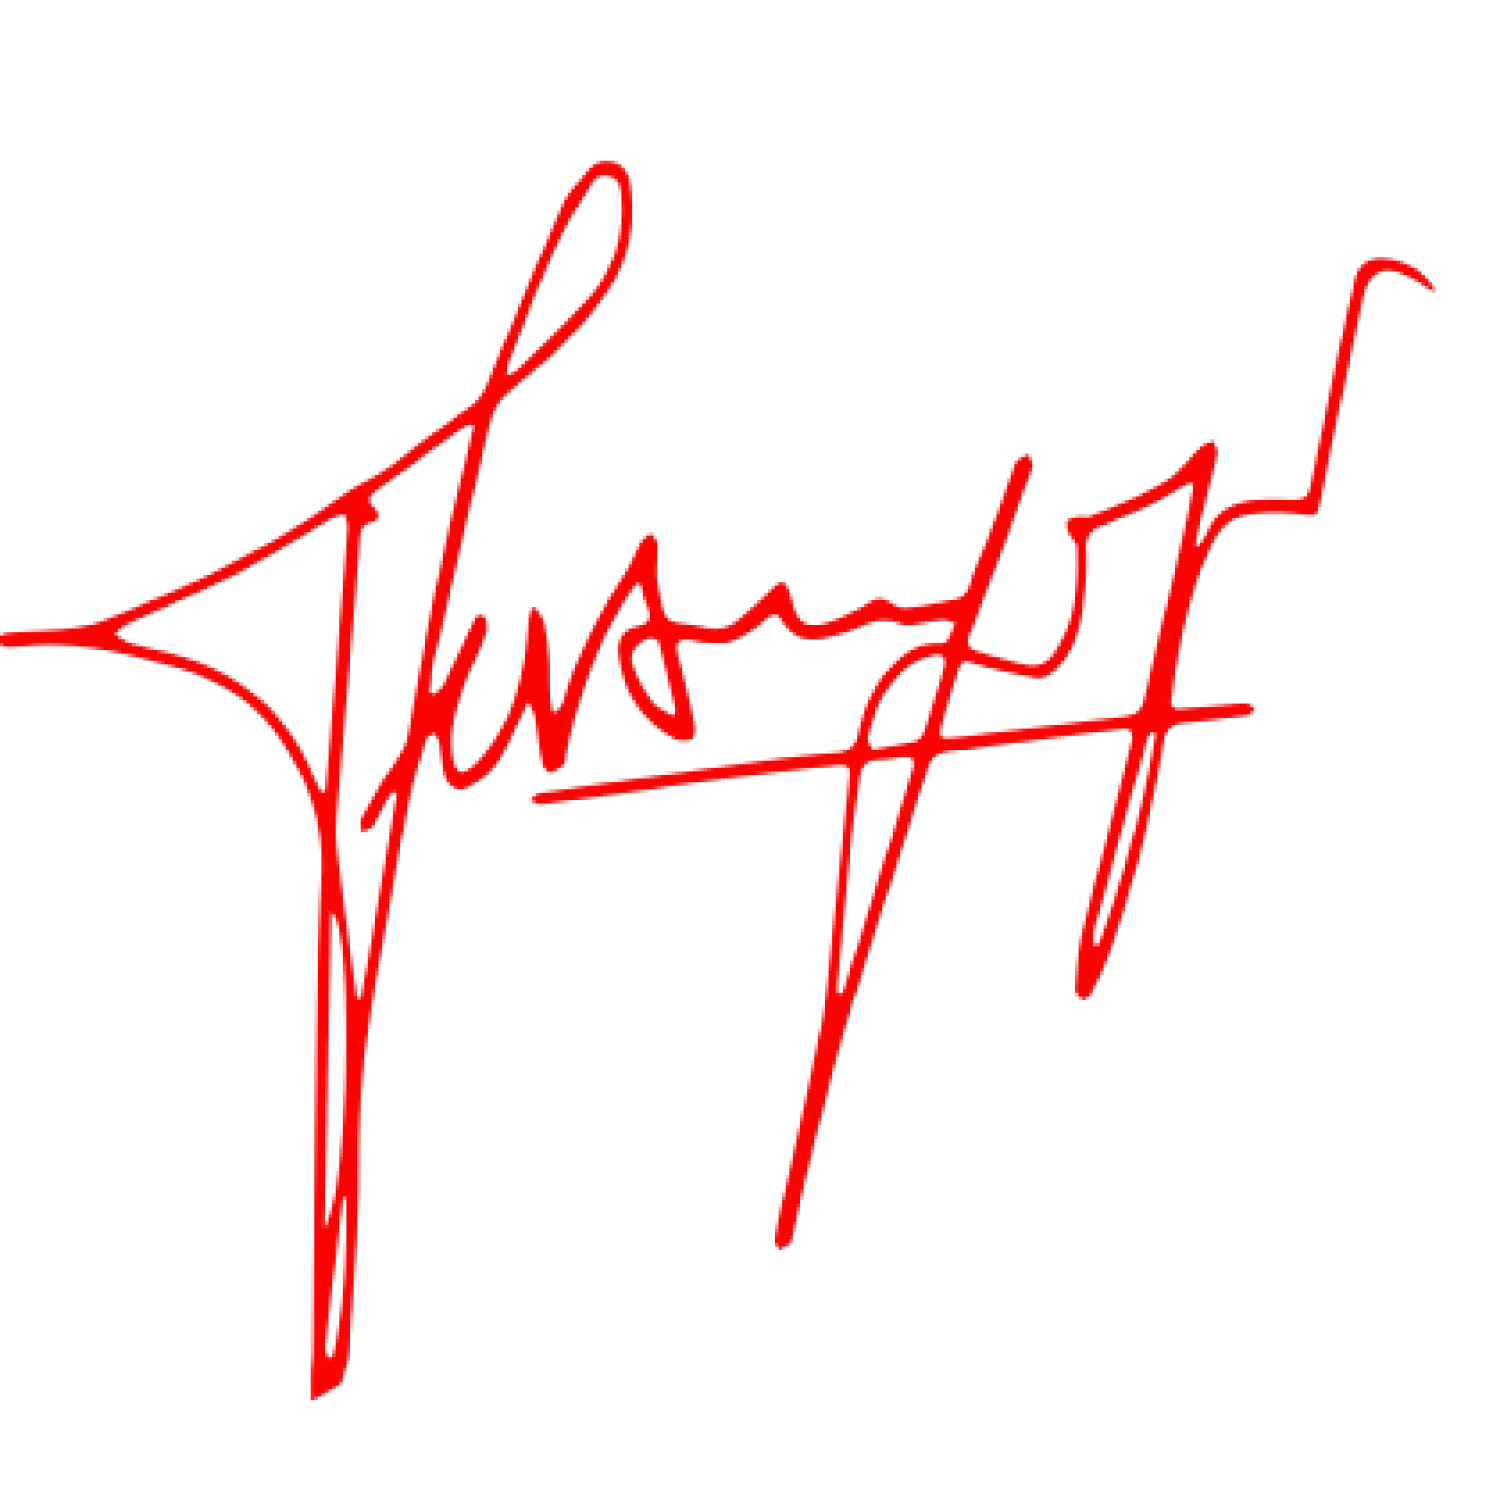 signature_1-removebg-preview.png